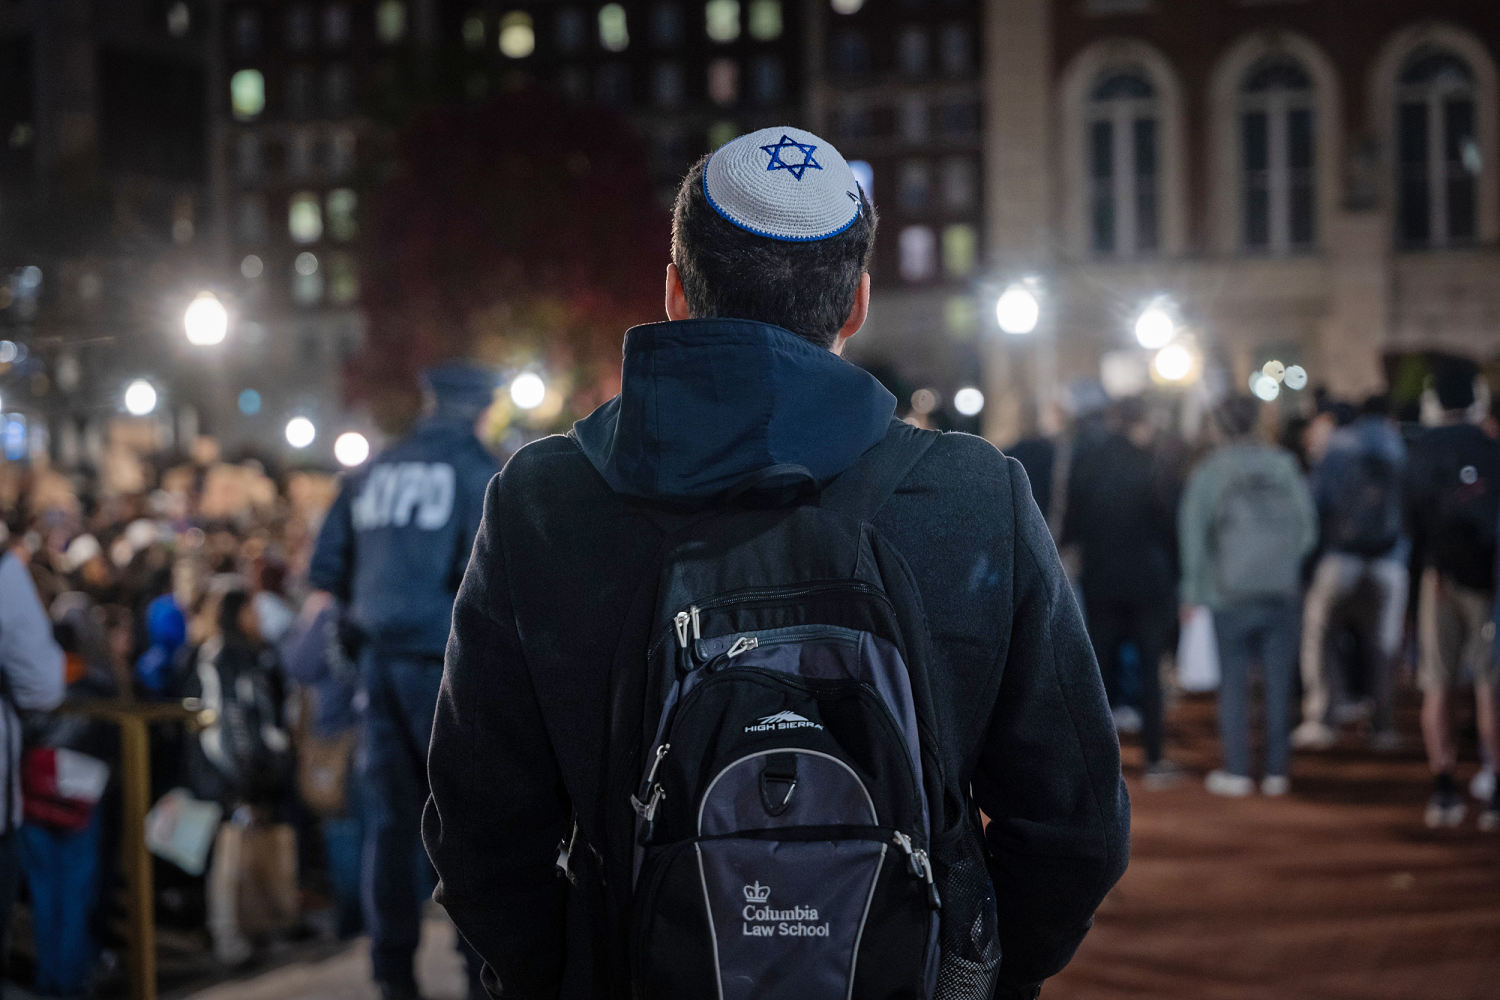 73% of Jewish college students have experienced or seen antisemitism since start of school year, new survey finds